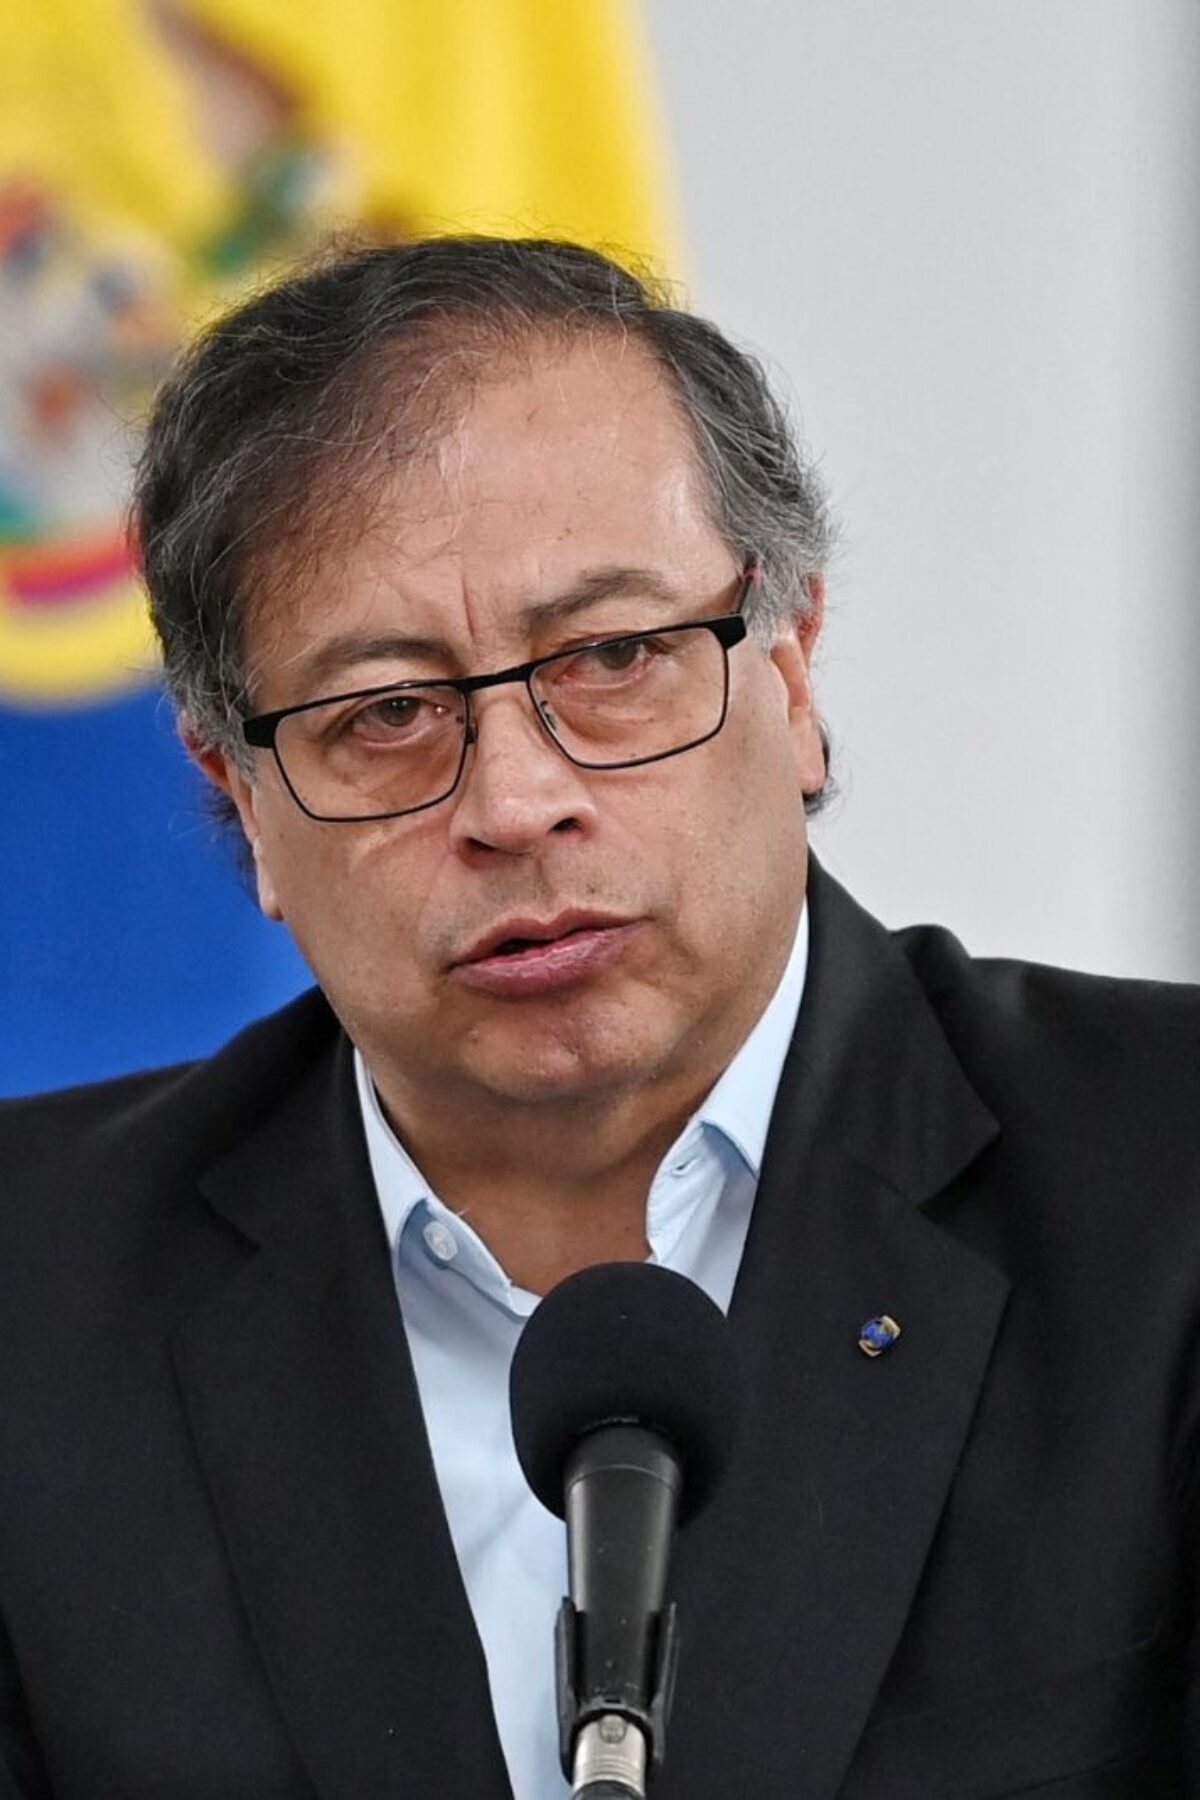 Colombian President Gustavo Petro delivers a speech after voting during the country's regional elections, in Bogota on October 29, 2023. Colombians go to the polls to elect new mayors, municipal councillors, governors and lawmakers in regional assemblies for the 2024-27 period. (Photo by JUAN BARRETO / AFP) (Photo by JUAN BARRETO/AFP via Getty Images)